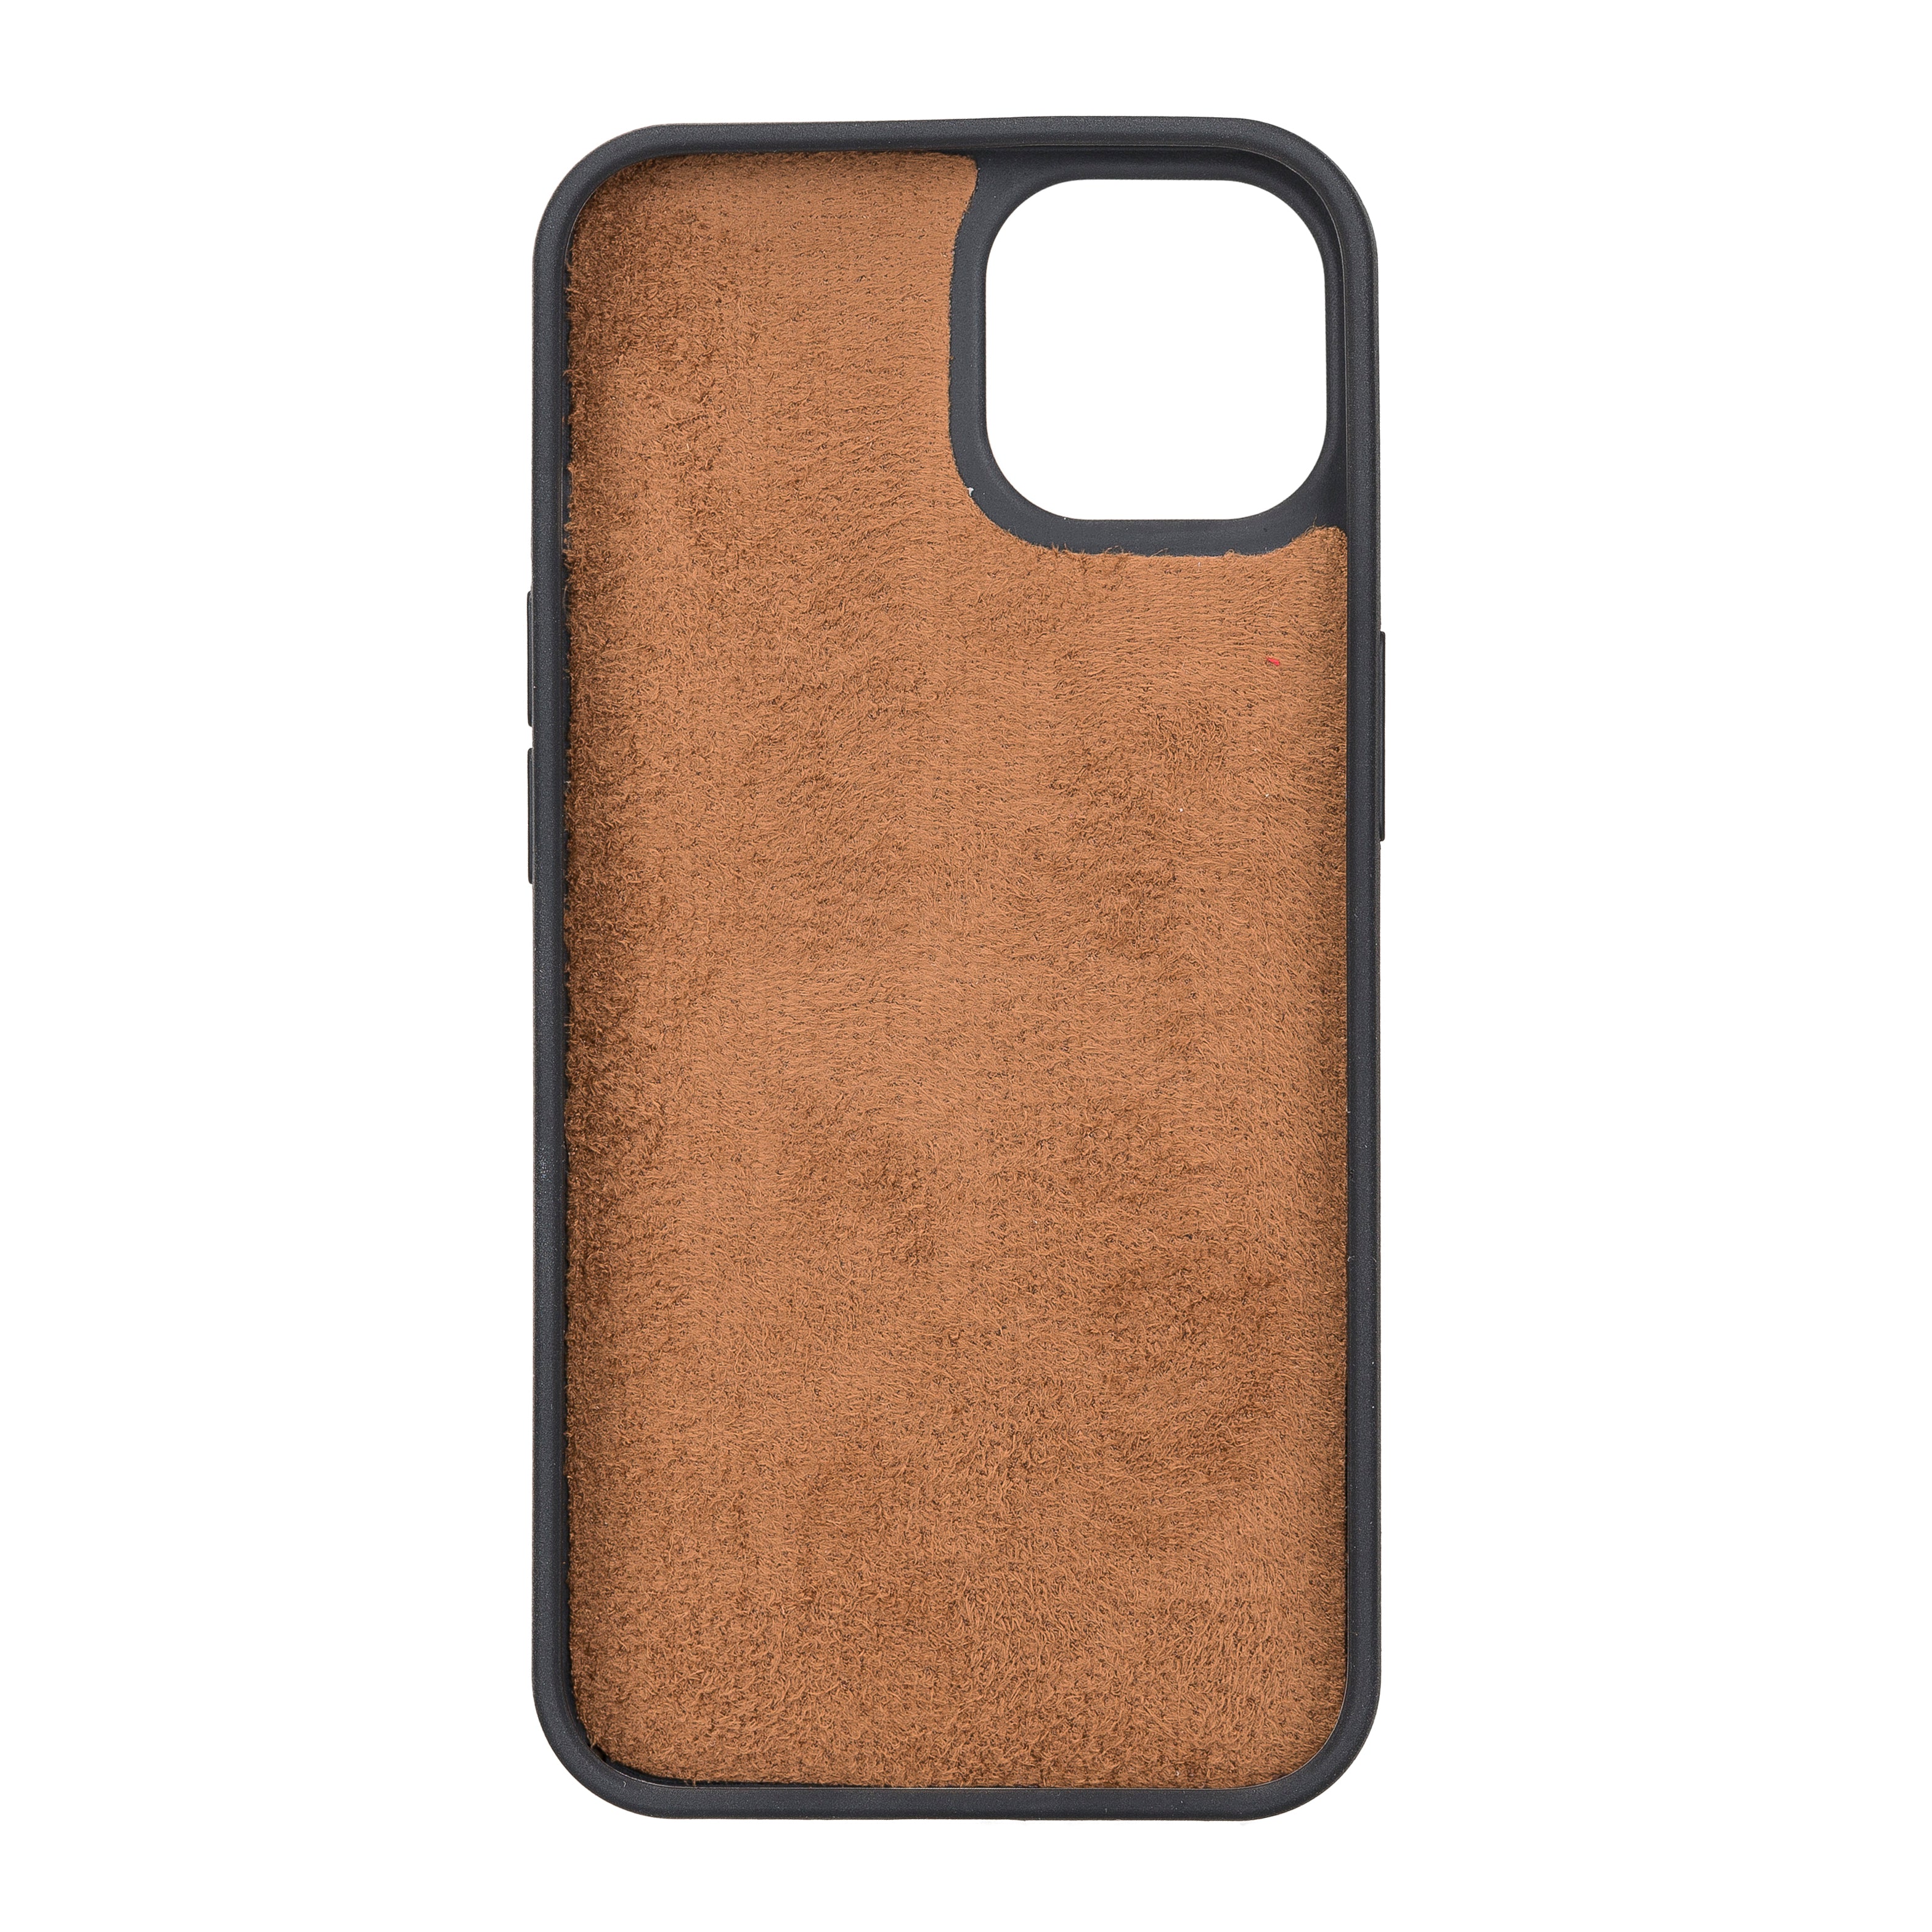 Burnished Tan Leather Snap On Cover Case for iPhone 13 Pro Max (6.7")